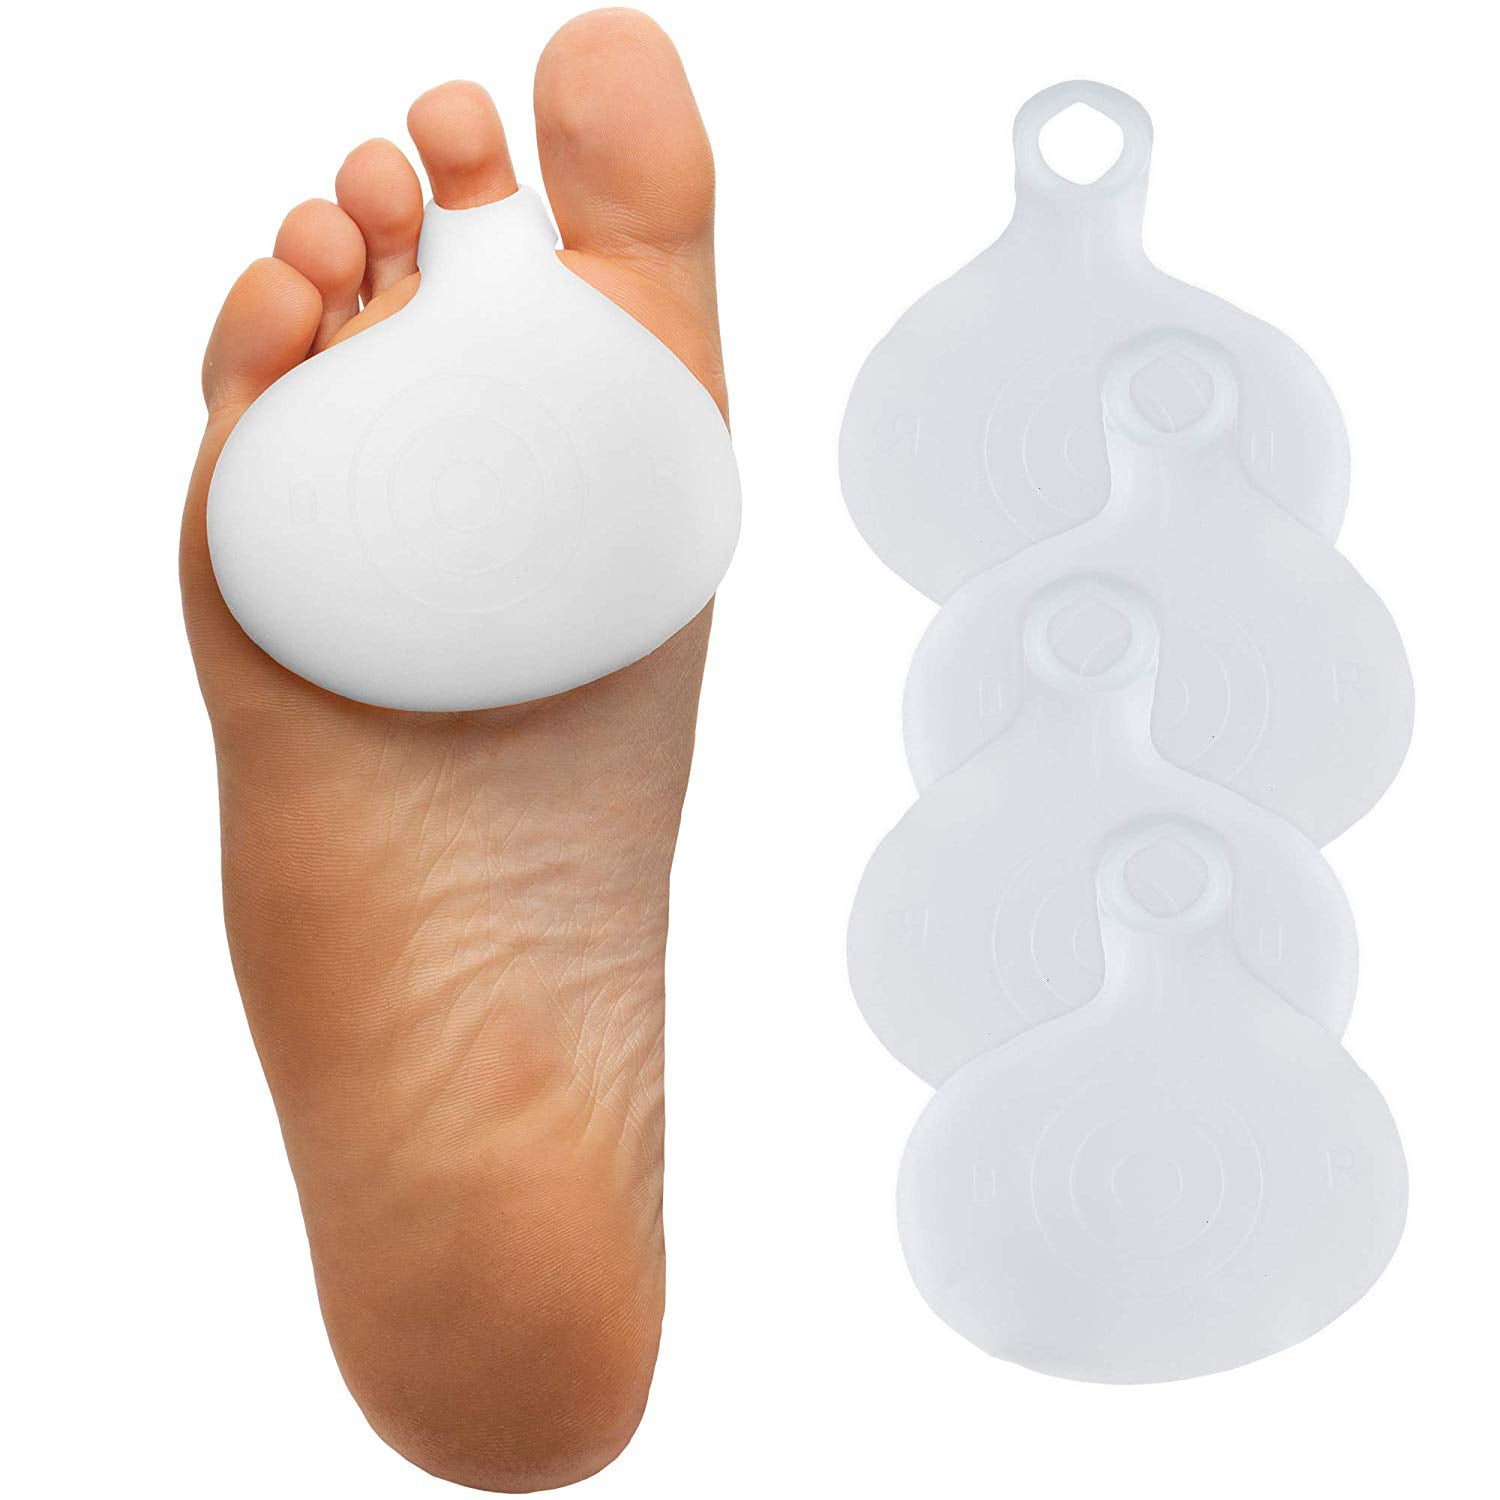 1Pair Gel Metatarsal Pad Ball of Foot Cushions Forefoot Pain Relief PadsYL 